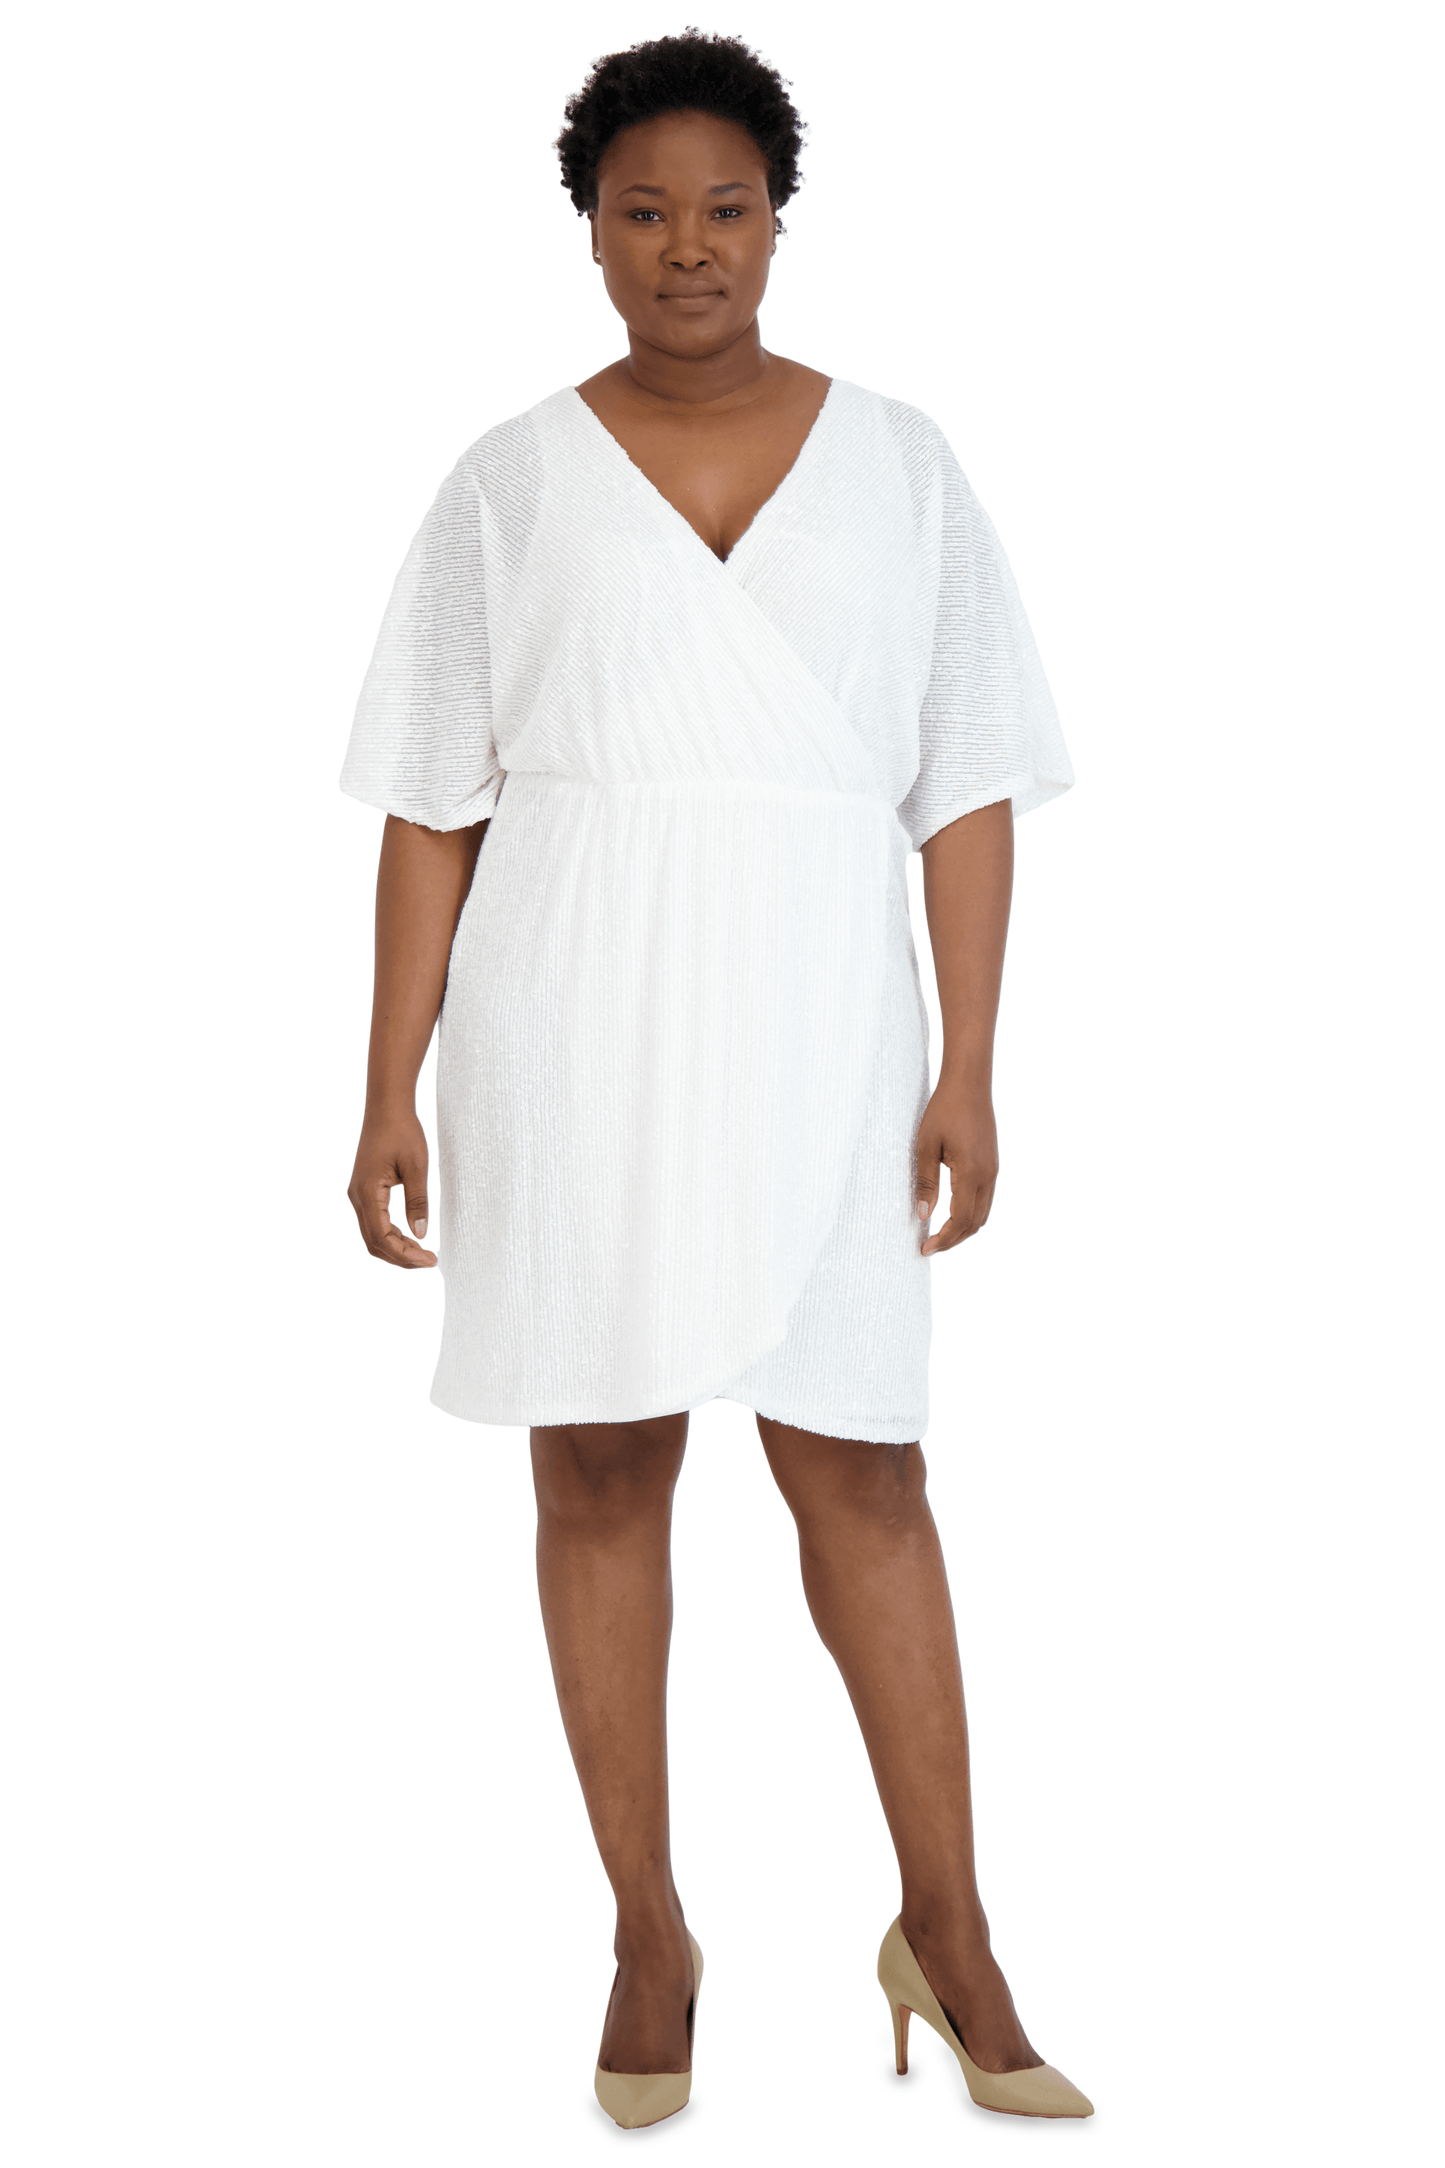 Nightway Short Plus Size Wrap Cocktail Dress 22105W - The Dress Outlet